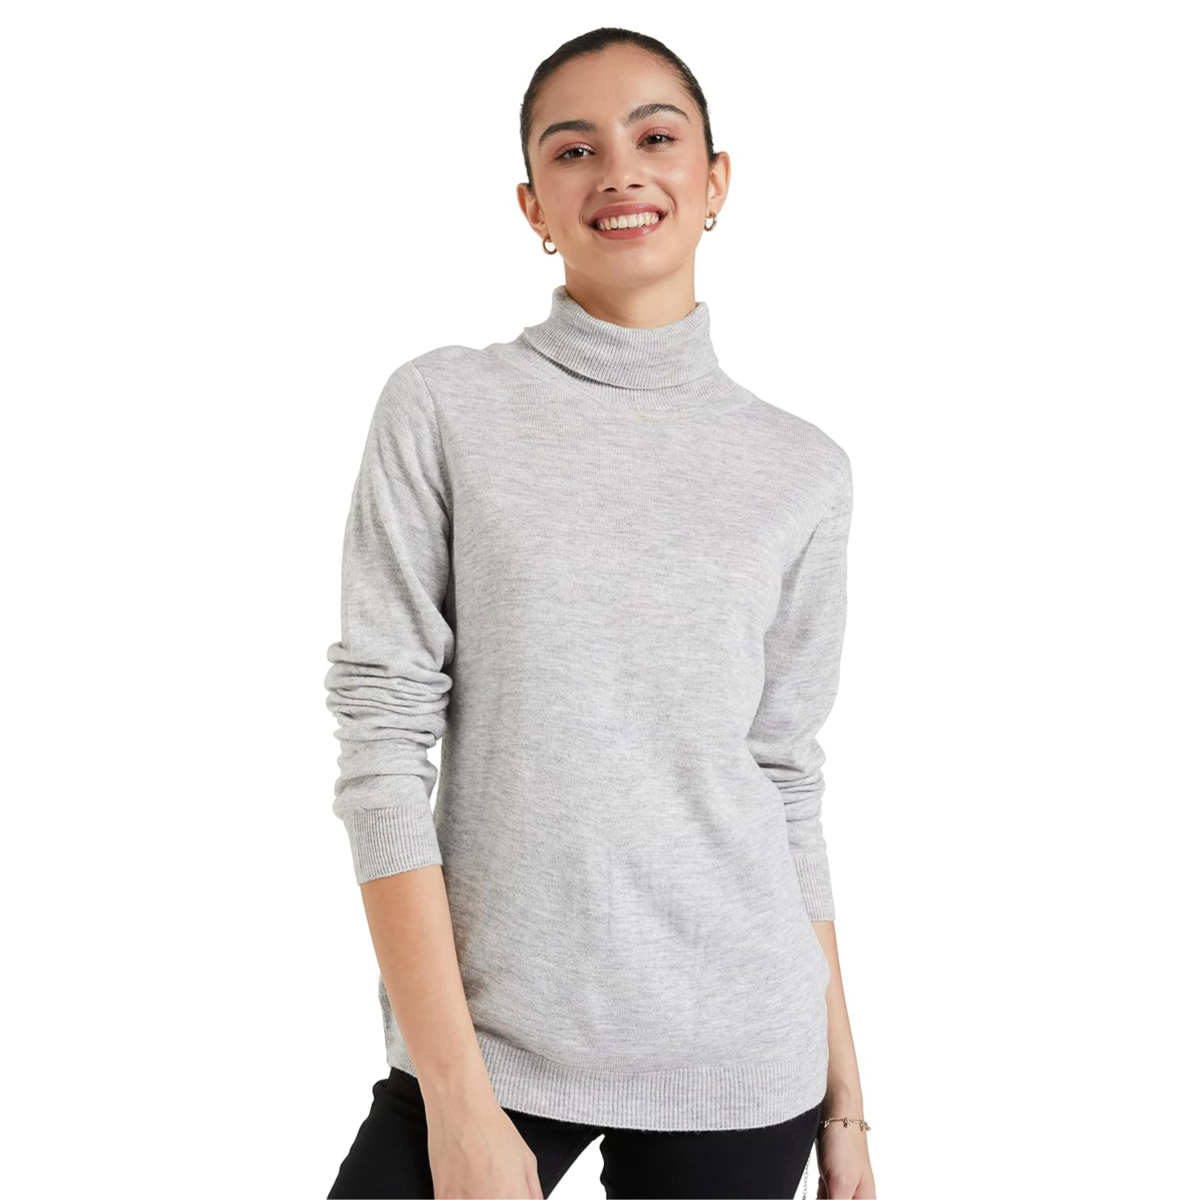 Best Sweaters Under 599: 6 Best Sweaters Under 599 in India to Get